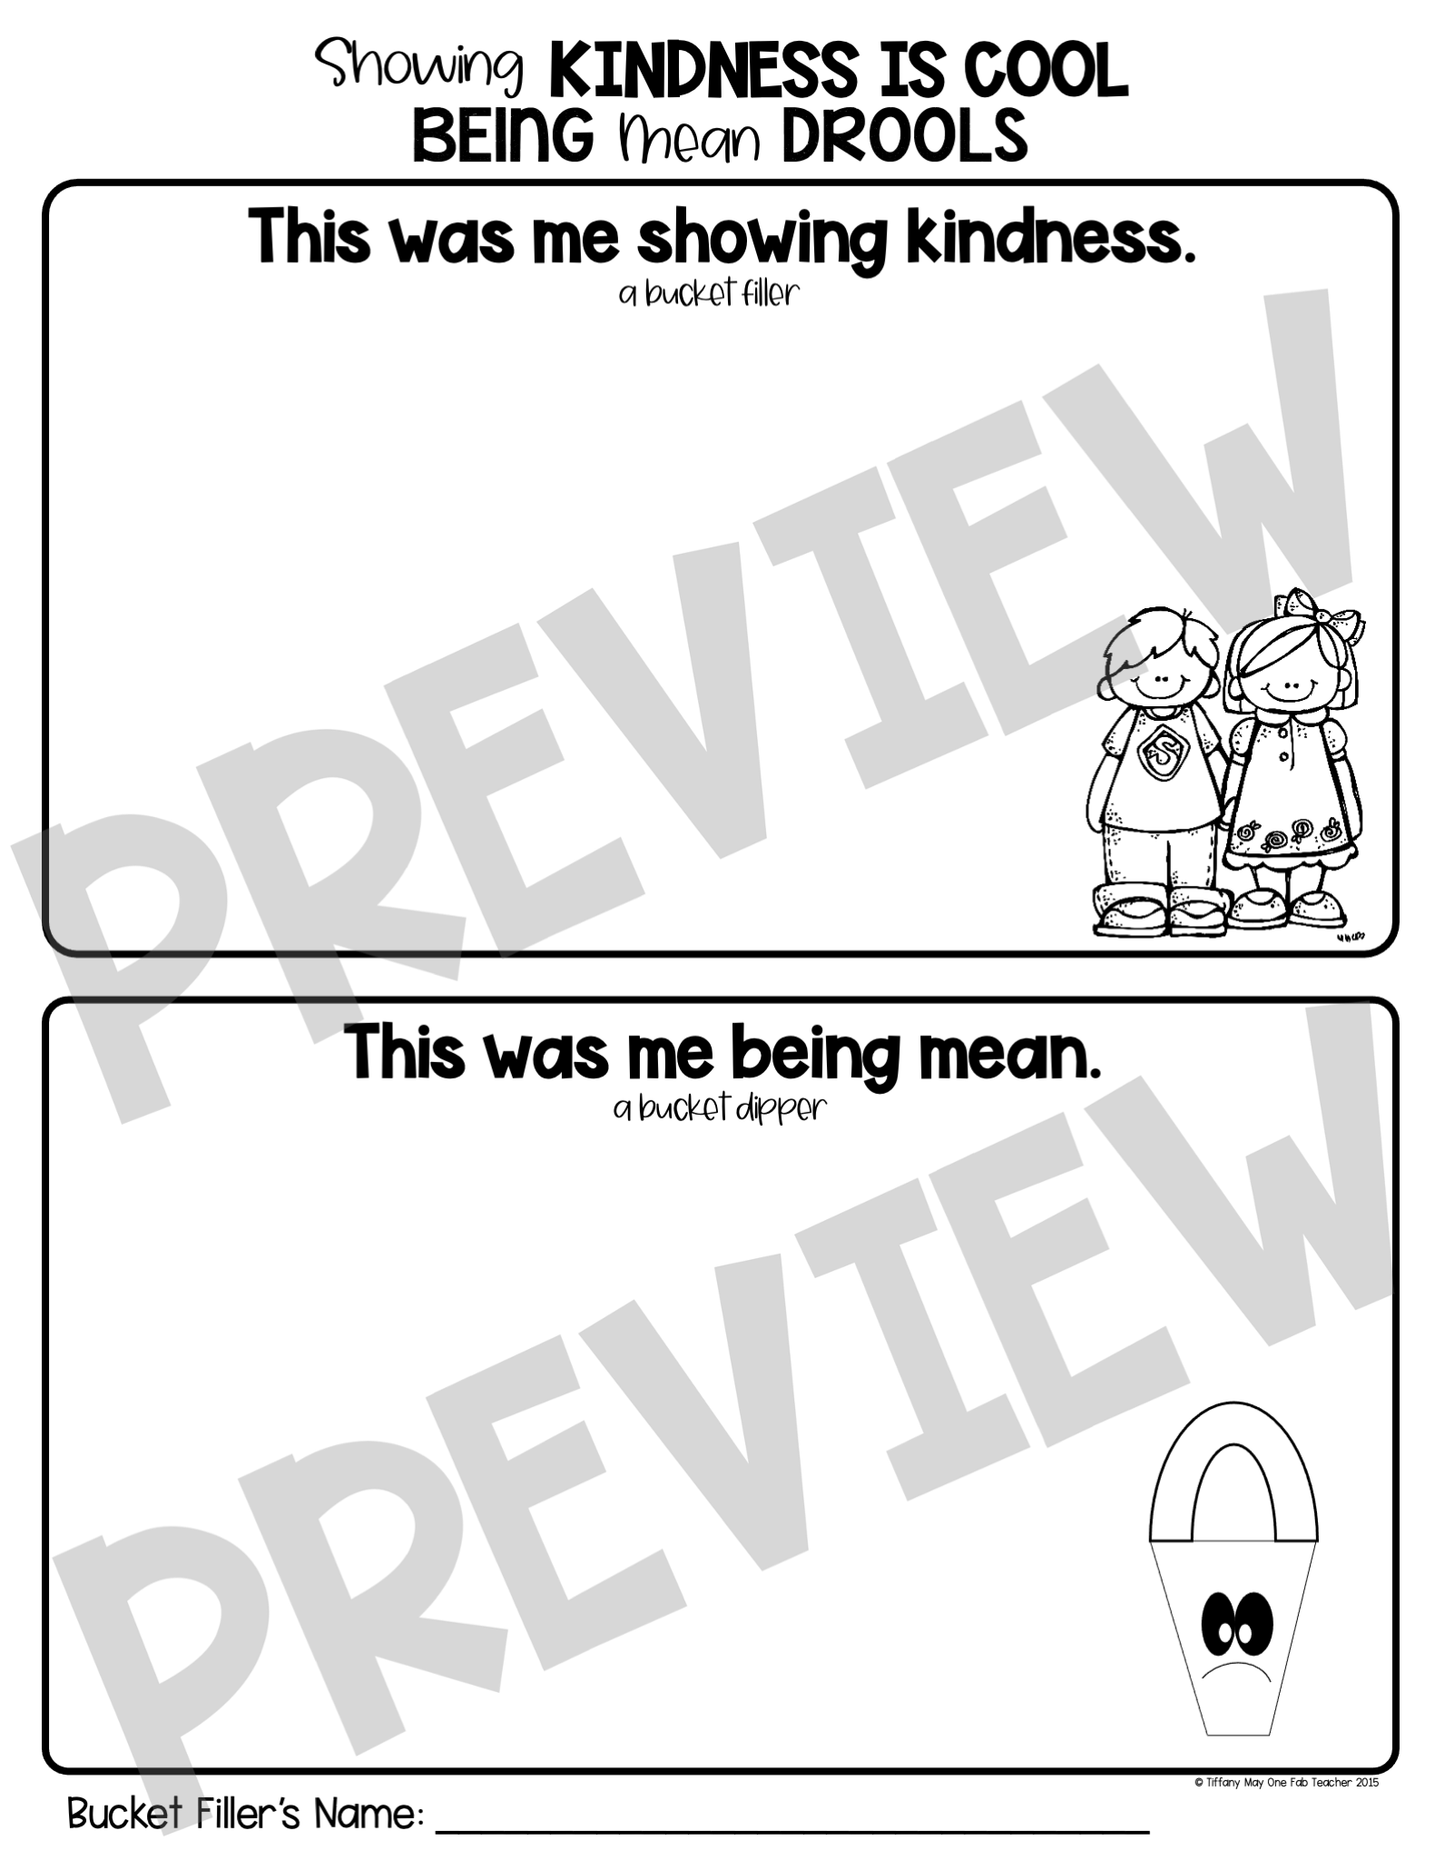 Being Kind Poster